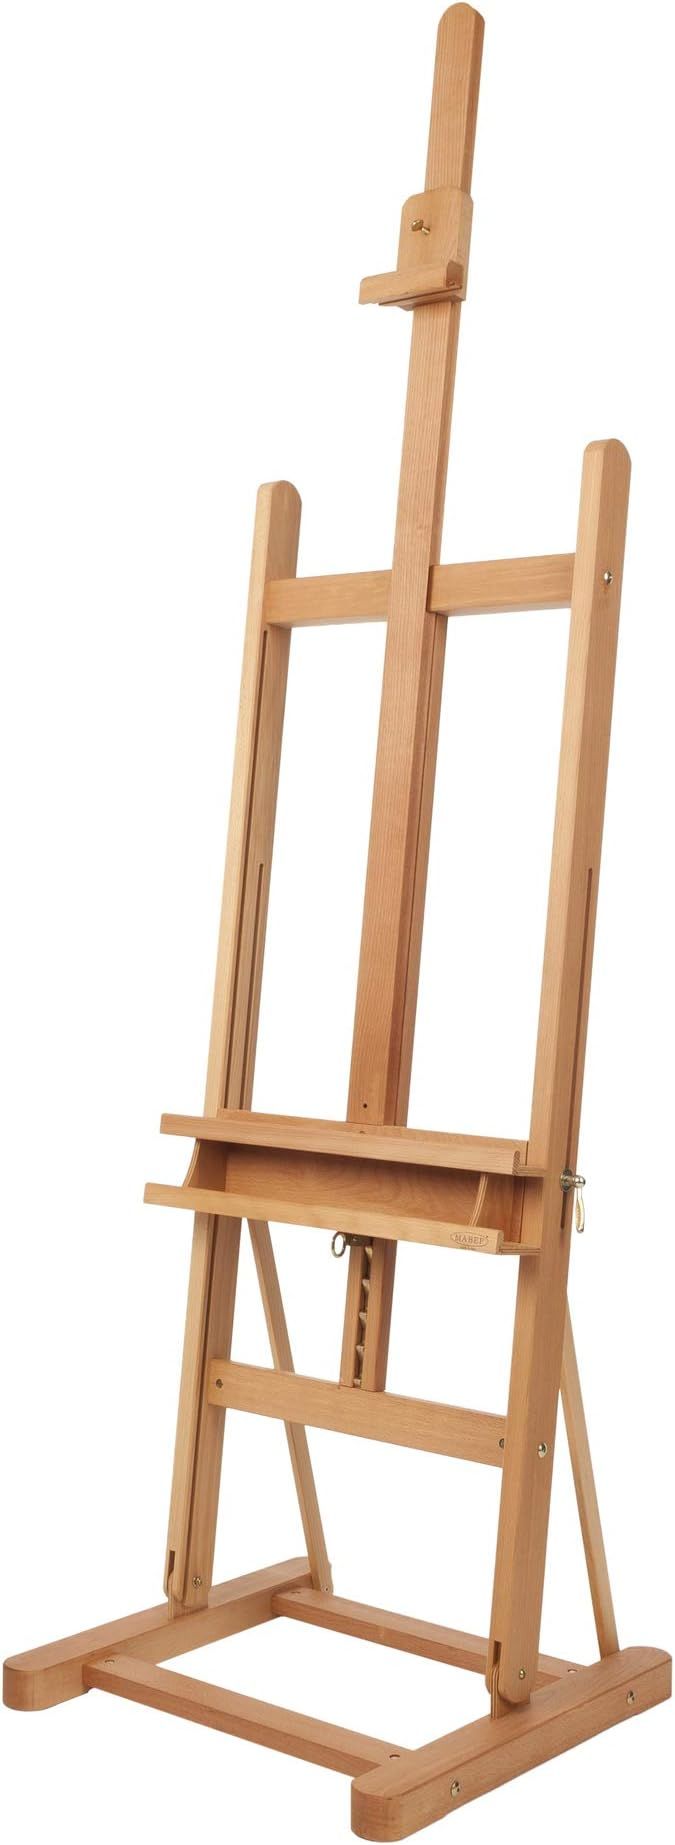 Mabef Artist KIT(M/9D Studio Easel with Tray, Natural | Amazon (US)